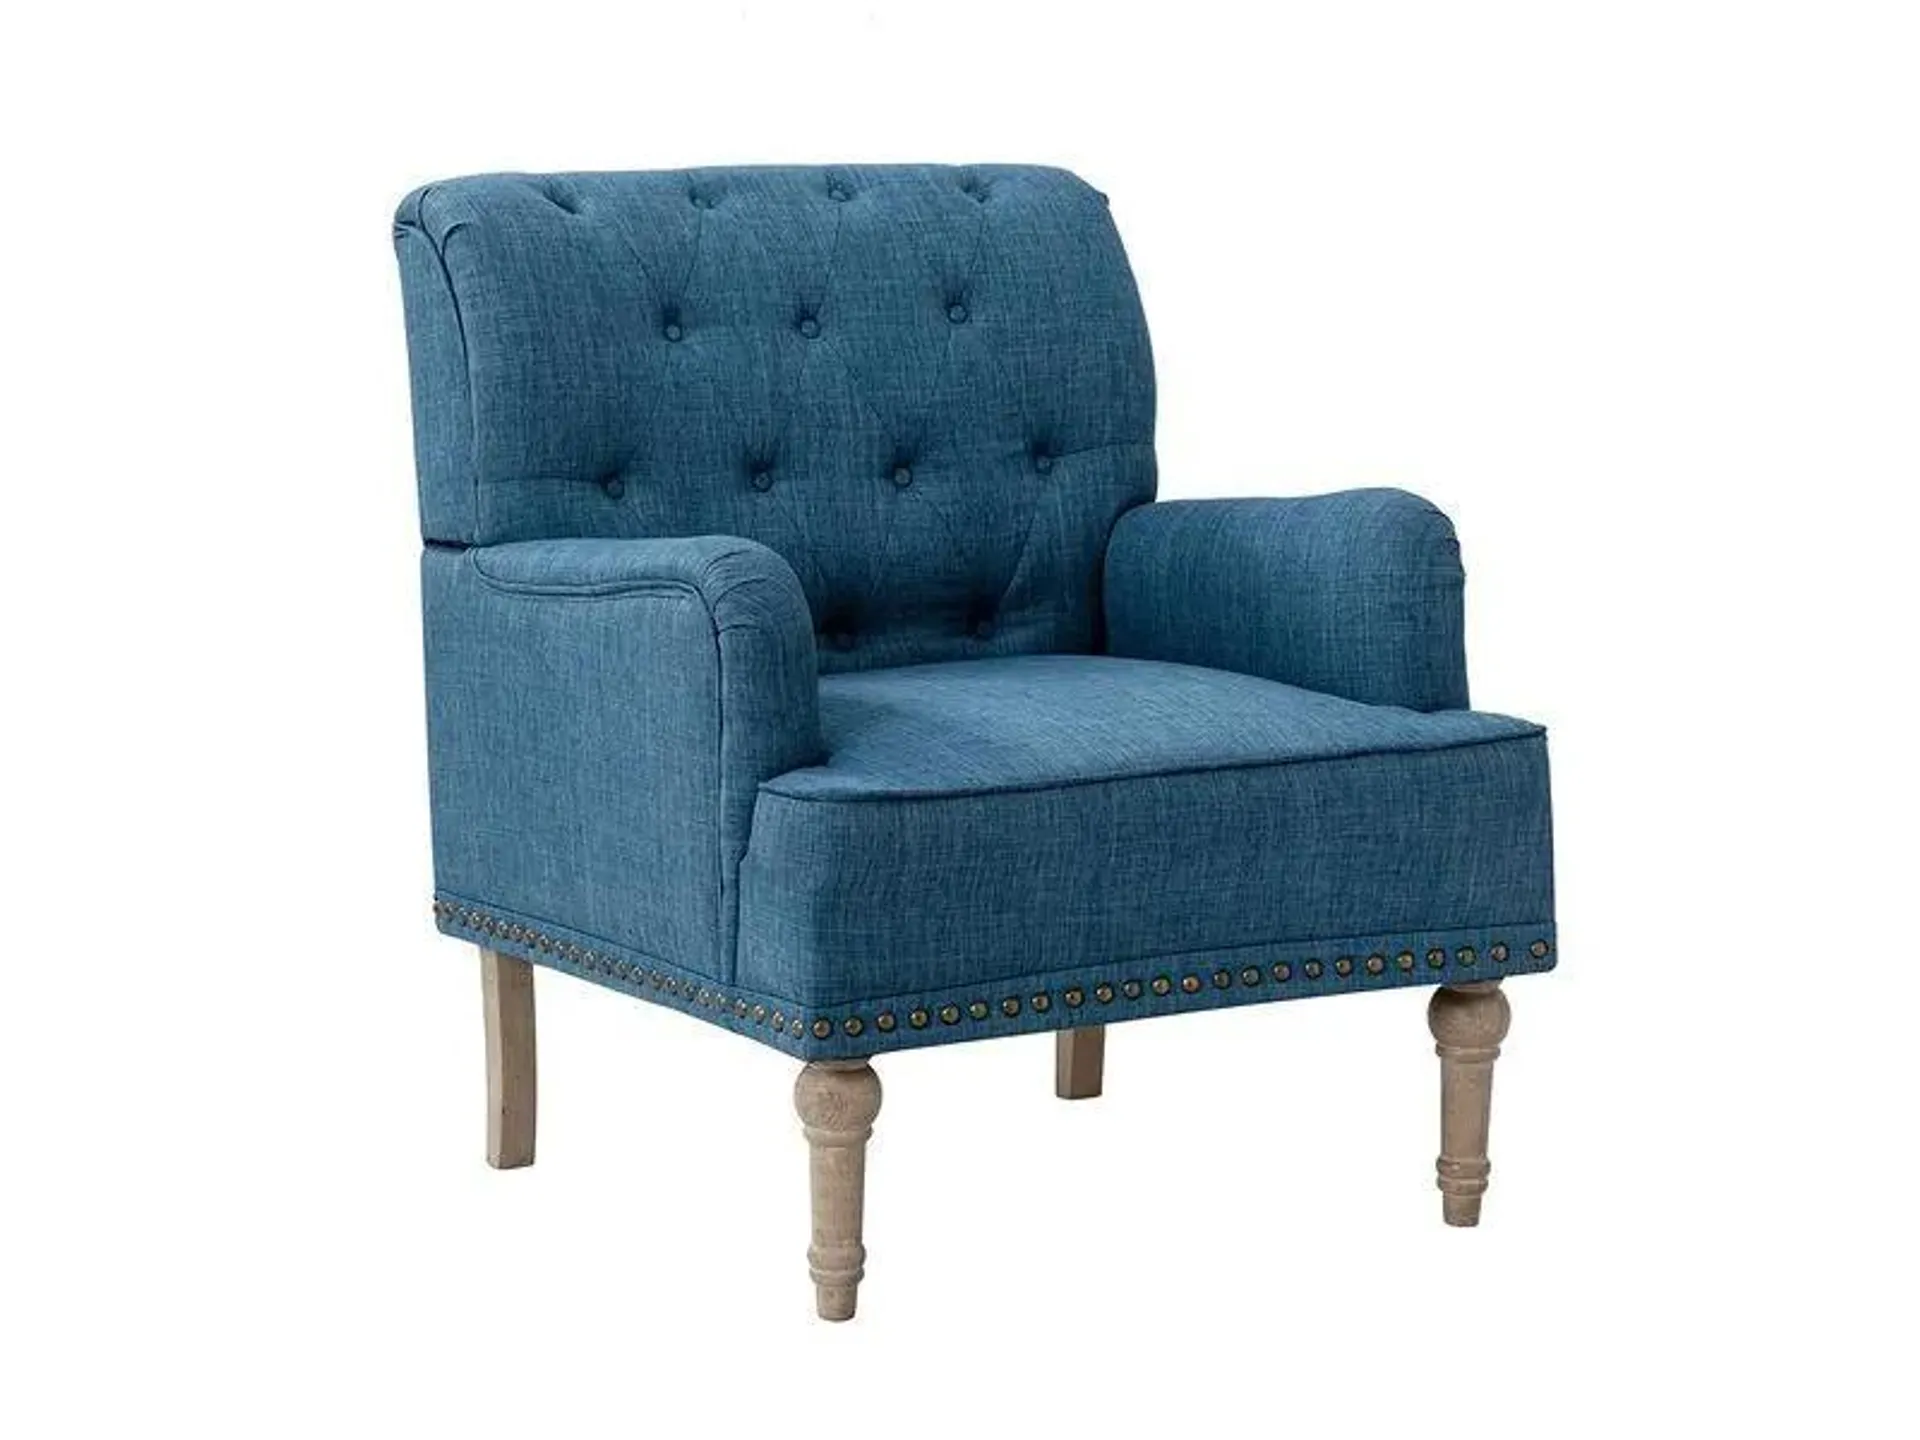 Classic Wooden Upholstered Accent Chair with Carved Legs